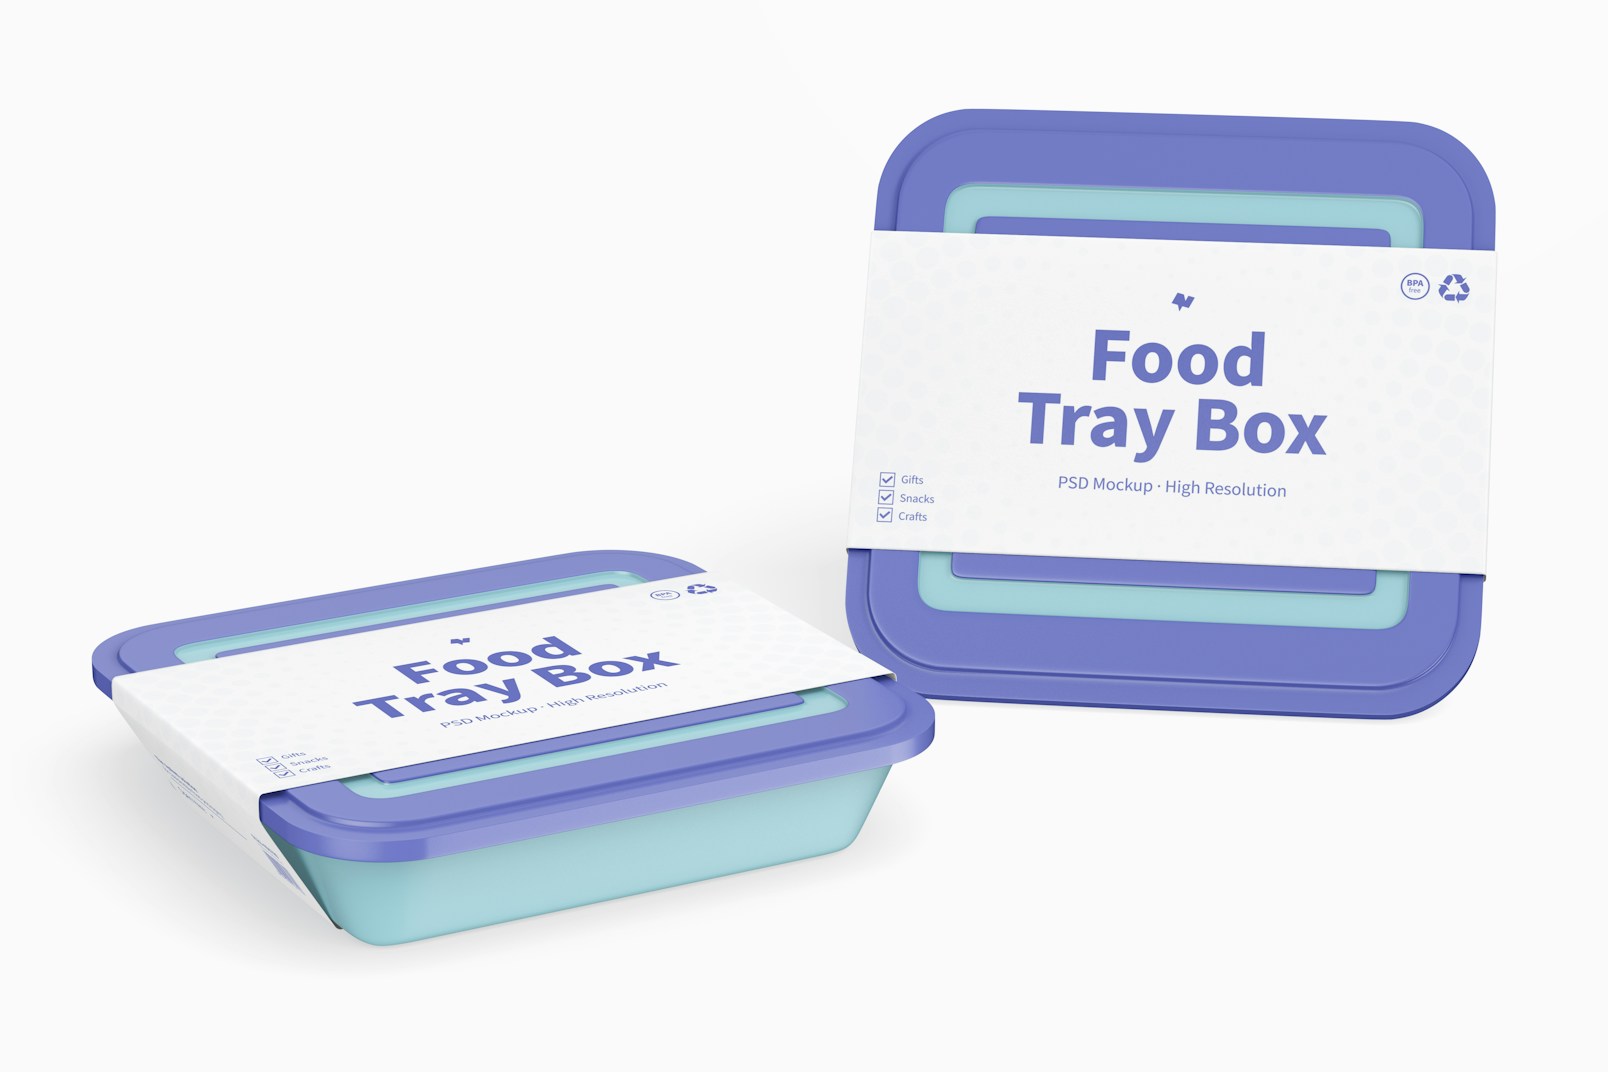 Food Tray Boxes with Lid Mockup